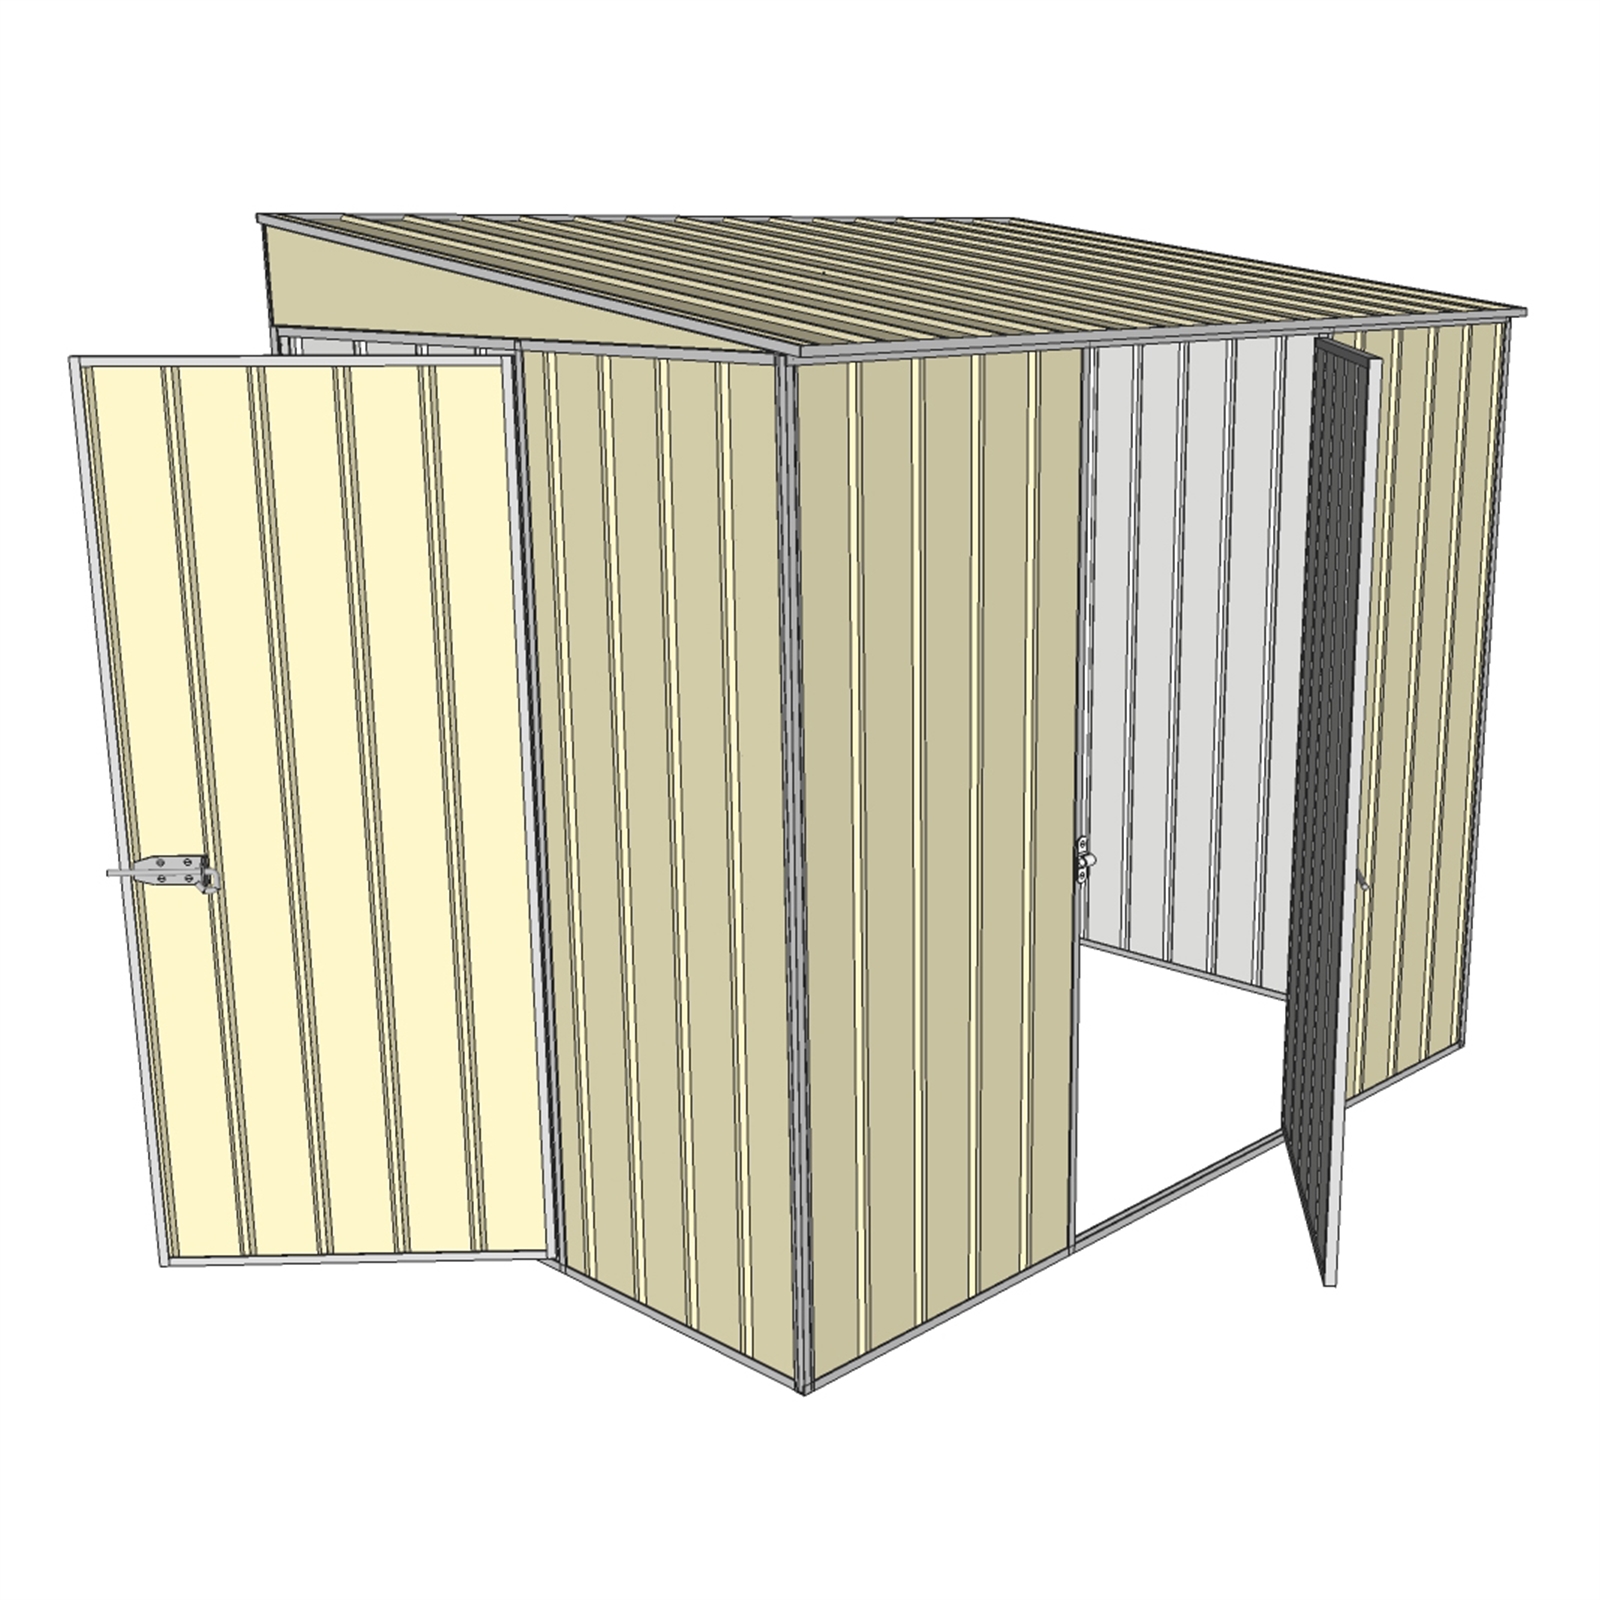 Build-a-Shed 2.3 x 1.5m Cream Skillion Two Single Hinged Doors Narrow Shed